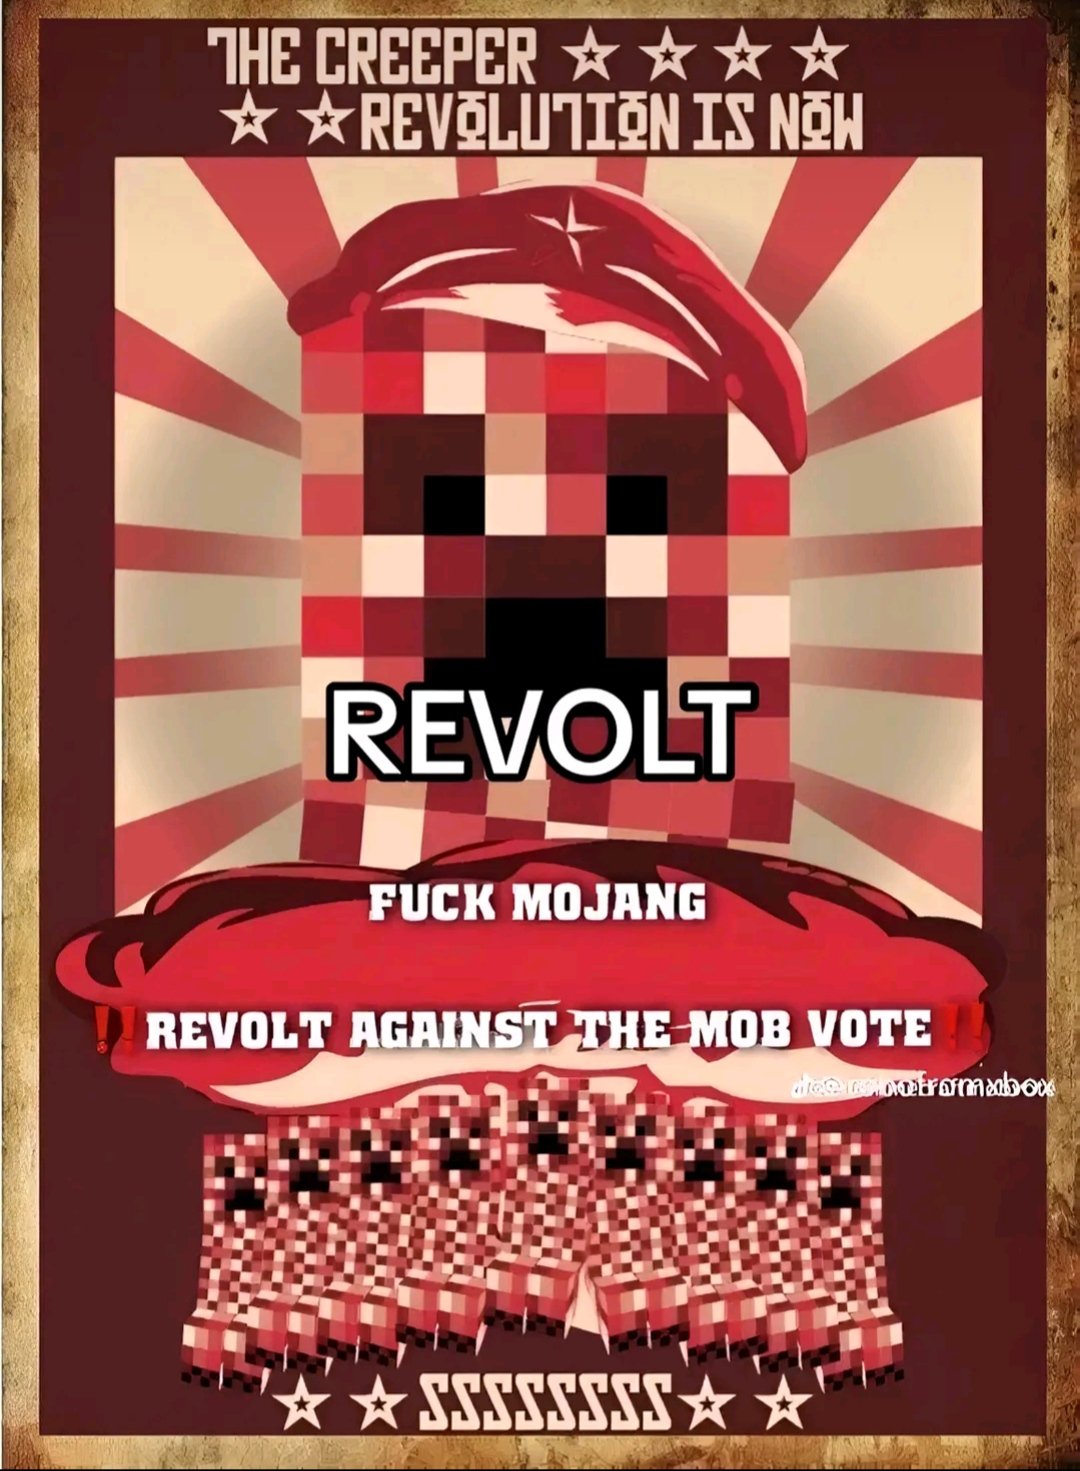 United we bargain, divided we beg”: The 2023 Minecraft mob vote